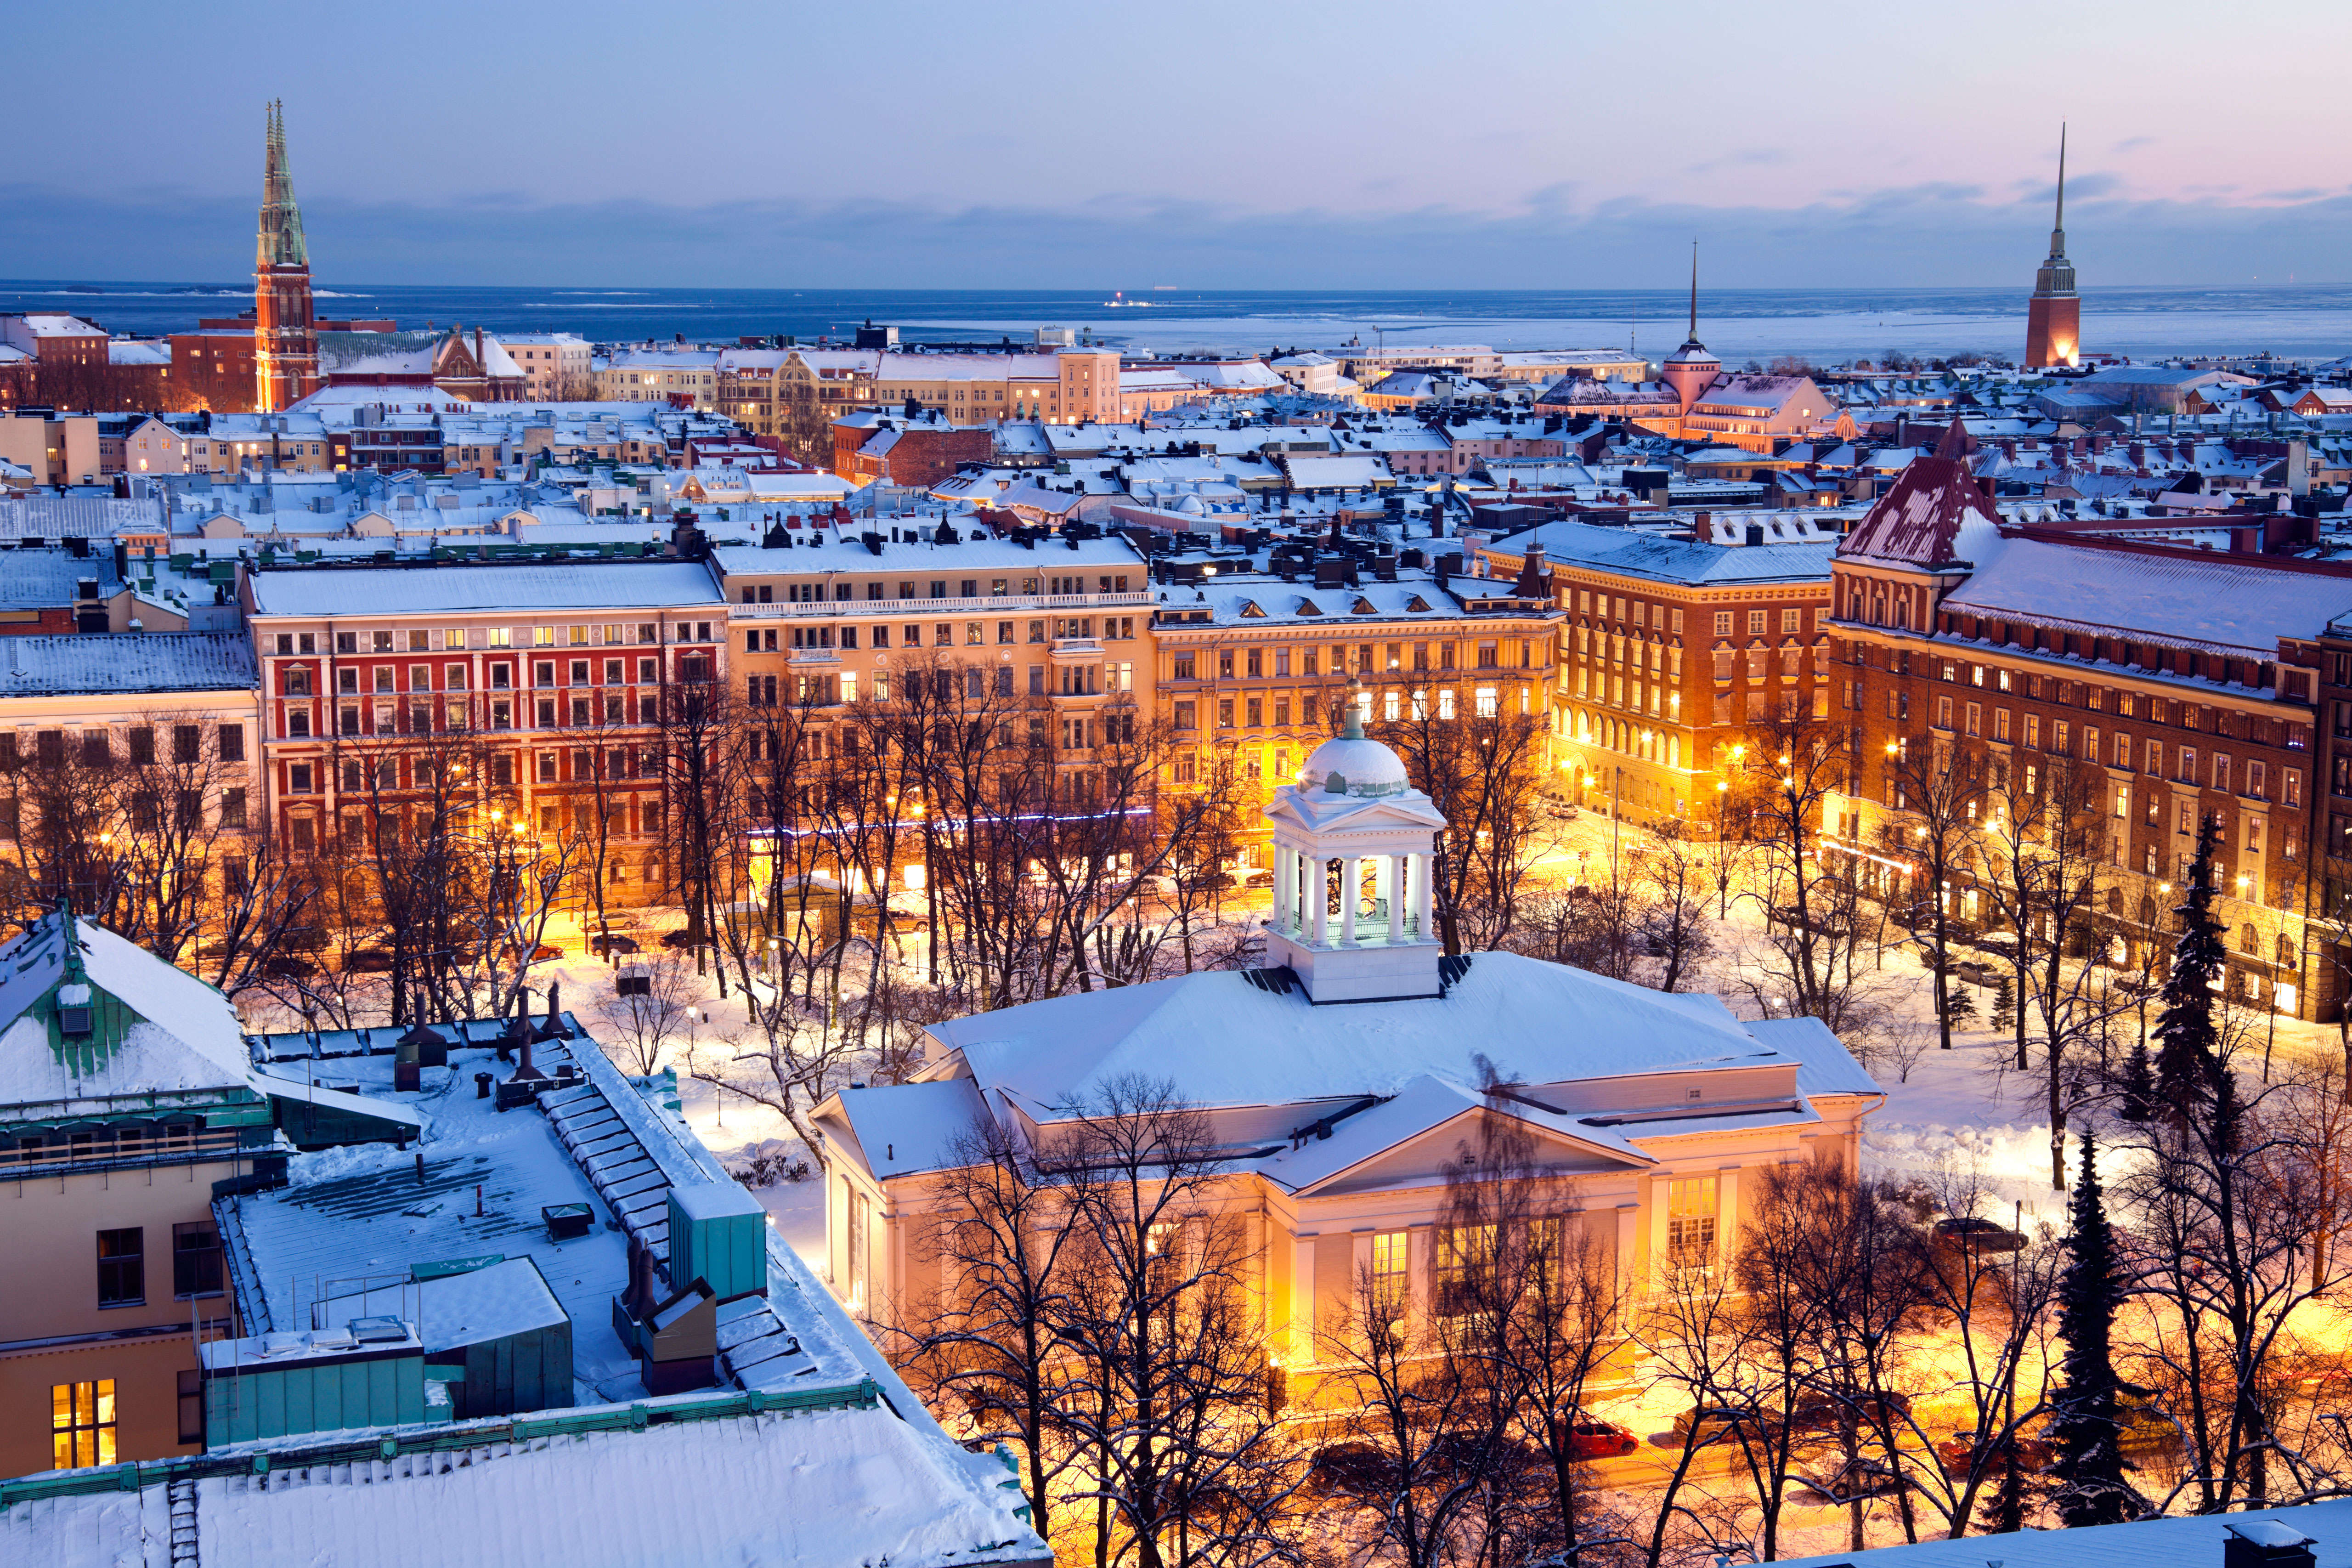 Helsinki is one of Europe’s most charming capitals